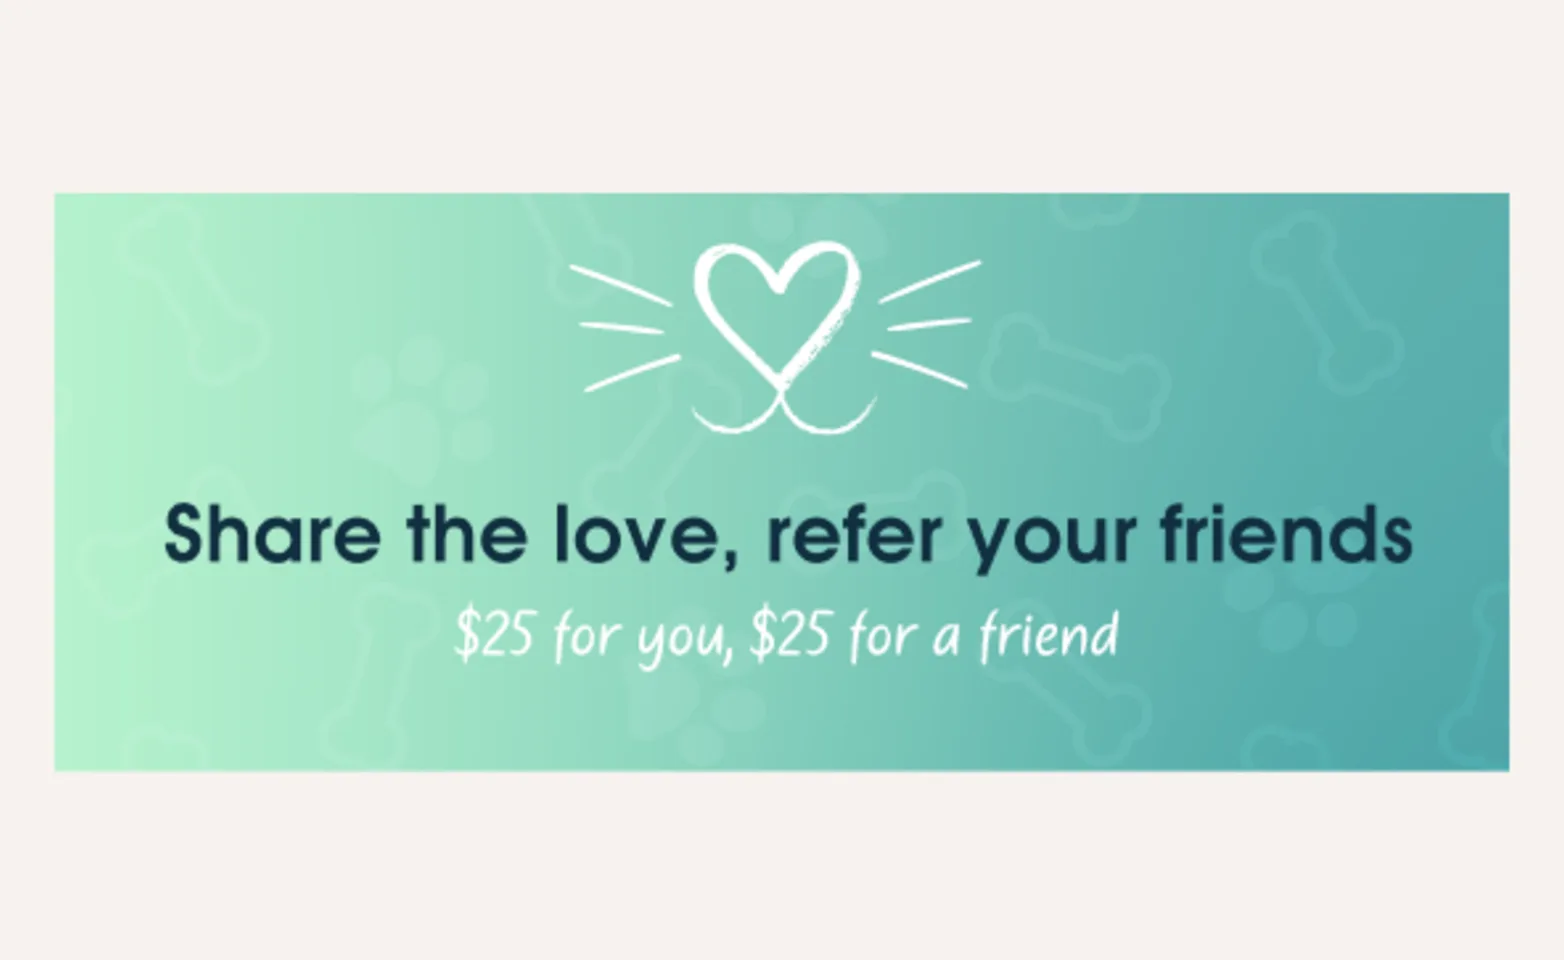 Share the Love, refer your friends promo banner